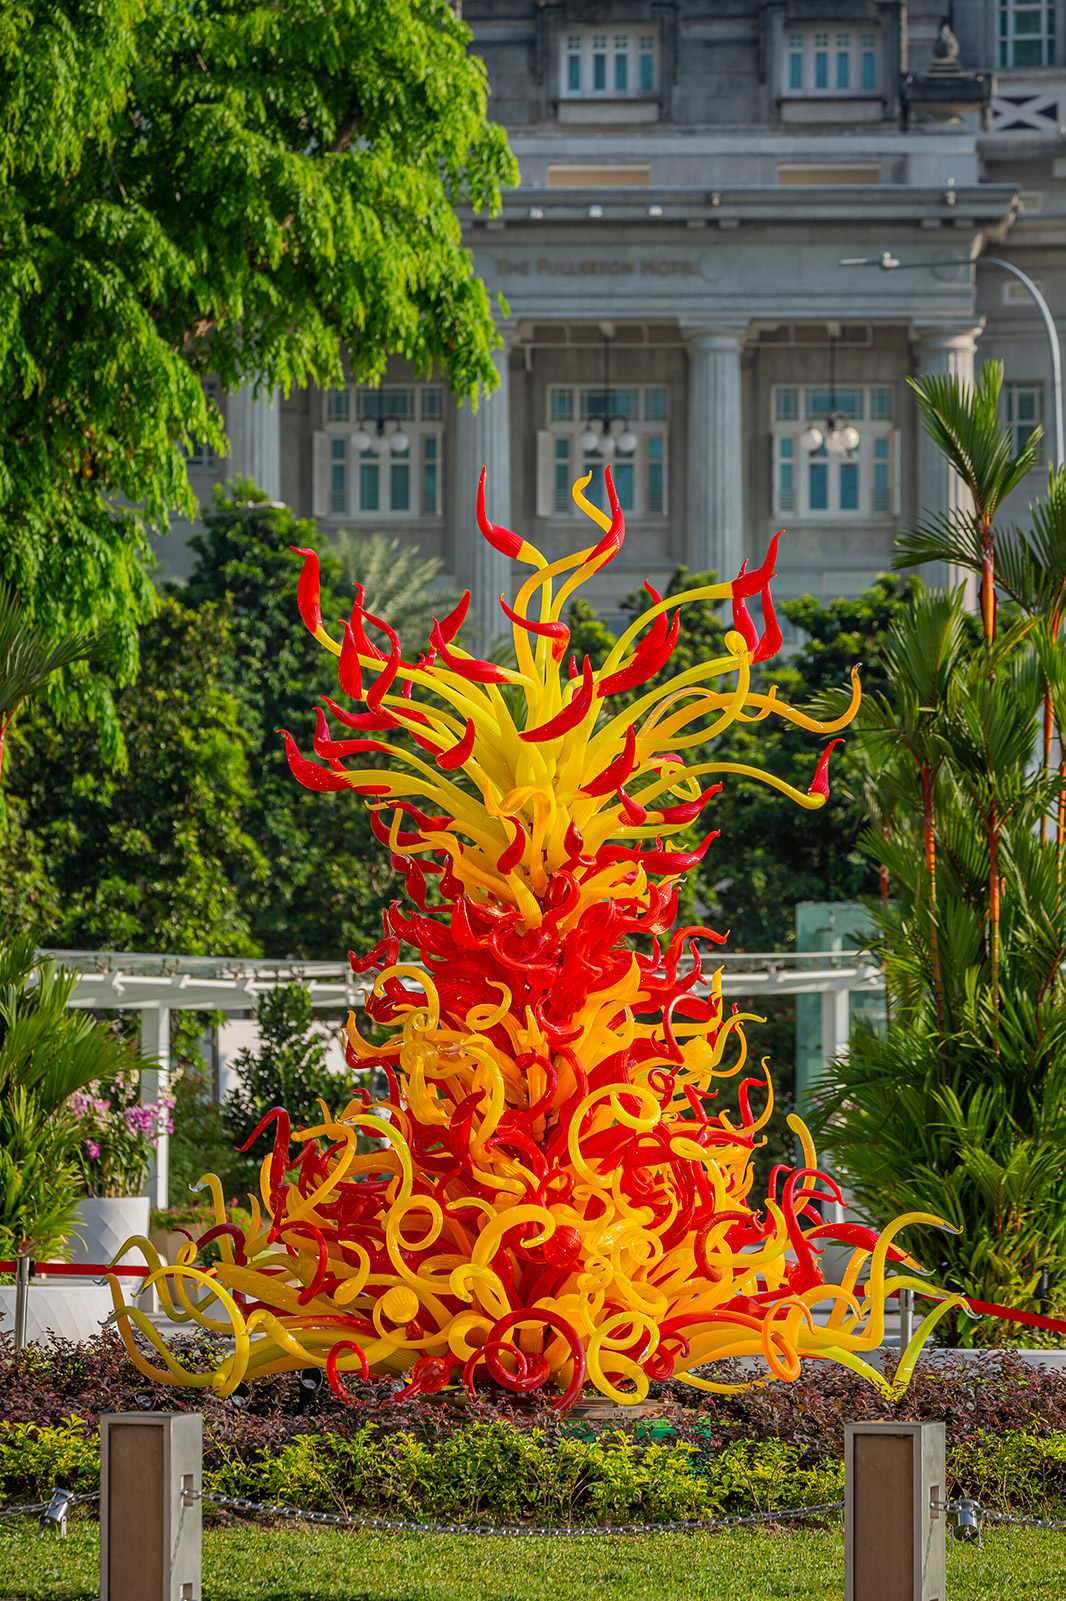 Paintbrush Tower, 2014, Dale Chihuly